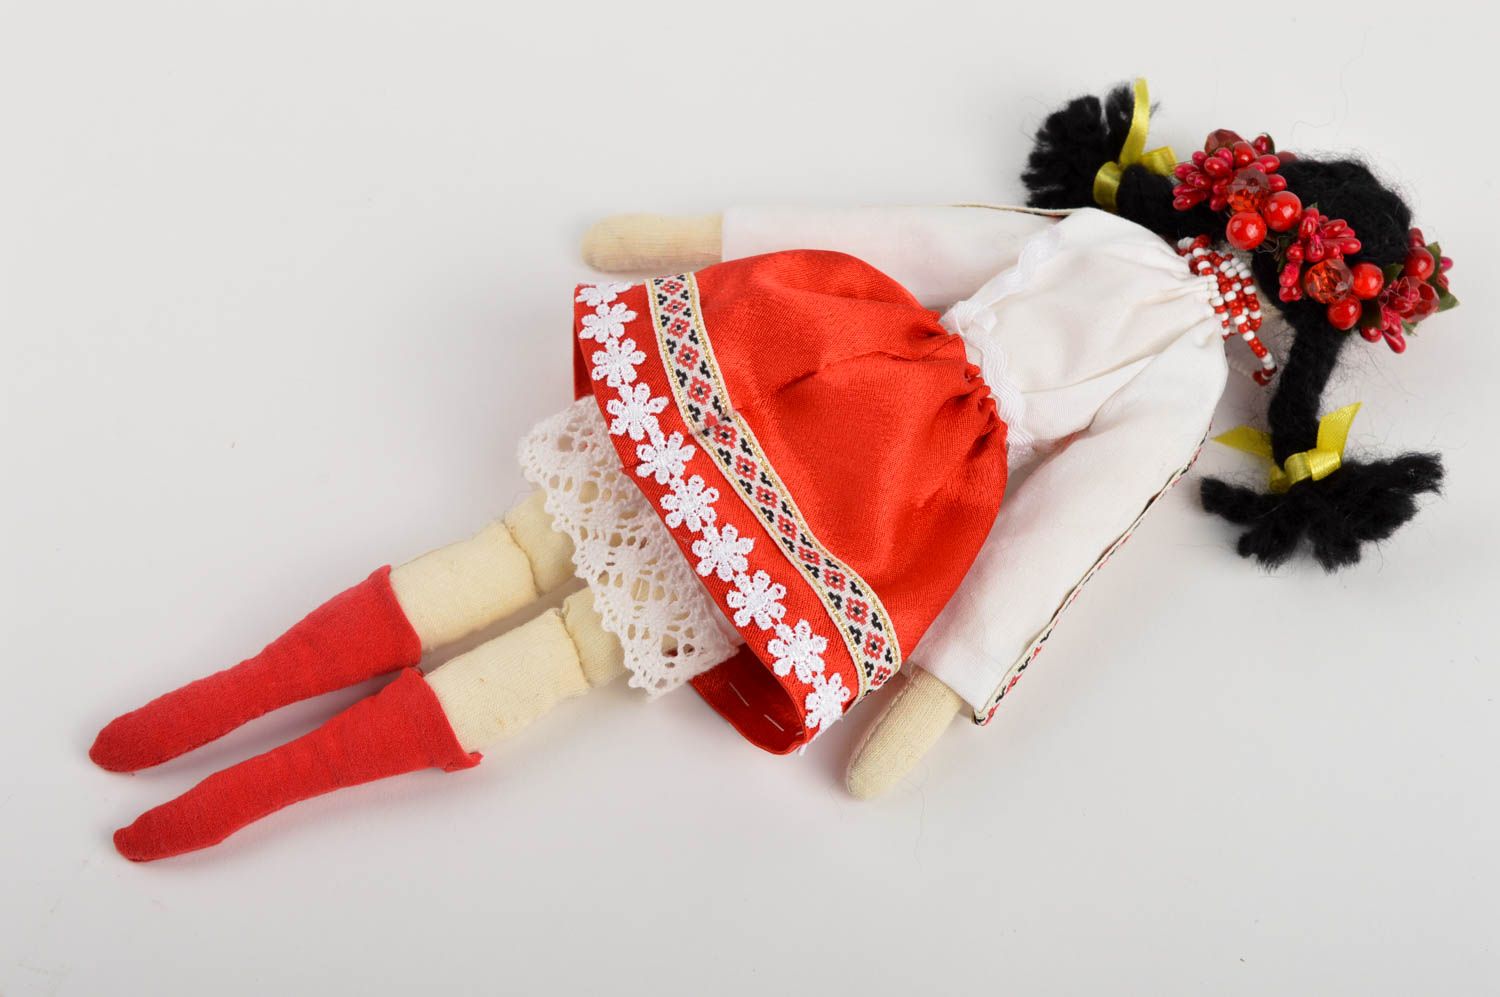 Handmade doll toy in national costume designer childrens toy decoration ideas photo 4